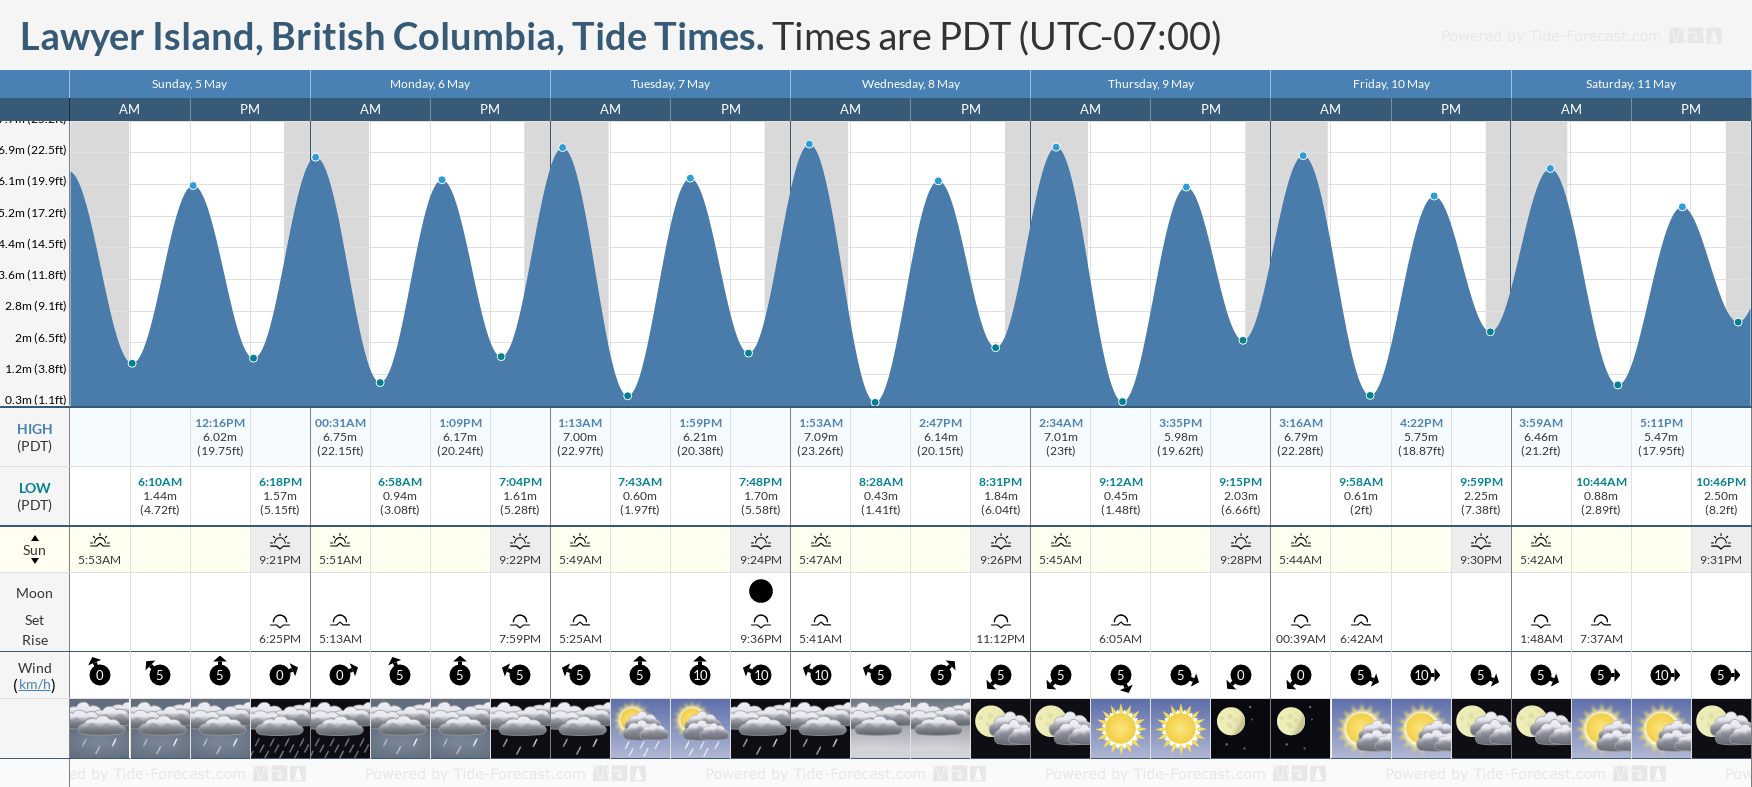 Lawyer Island, British Columbia Tide Chart including high and low tide tide times for the next 7 days